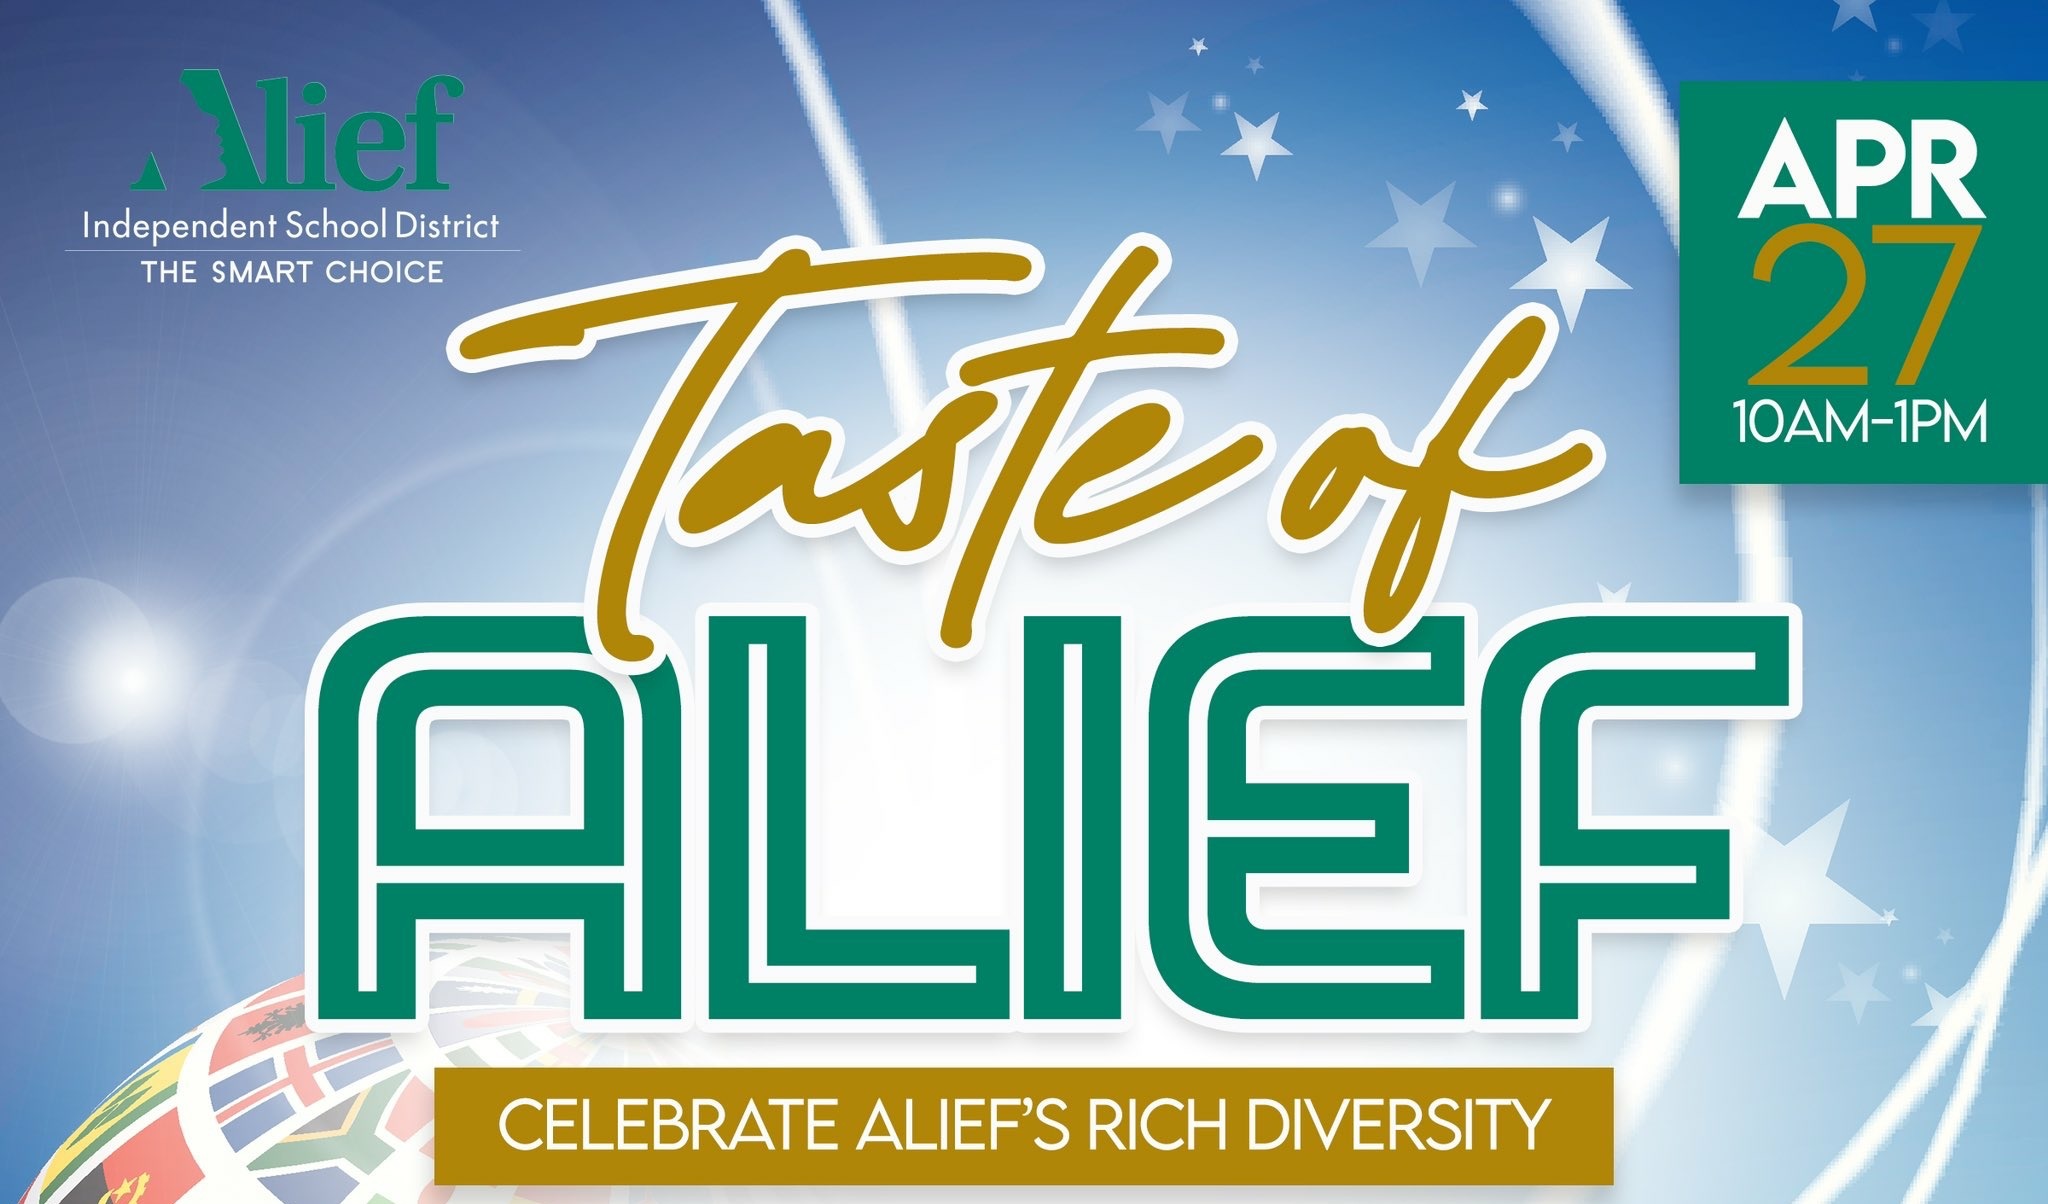 Join us for Taste of Alief! Sample, savor, and stroll through a celebration of our vibrant community's diversity at Crump Stadium on Saturday, April 27, from 10 am to 1 pm. Don't miss out on the delicious food and fantastic music! #TasteOfAlief